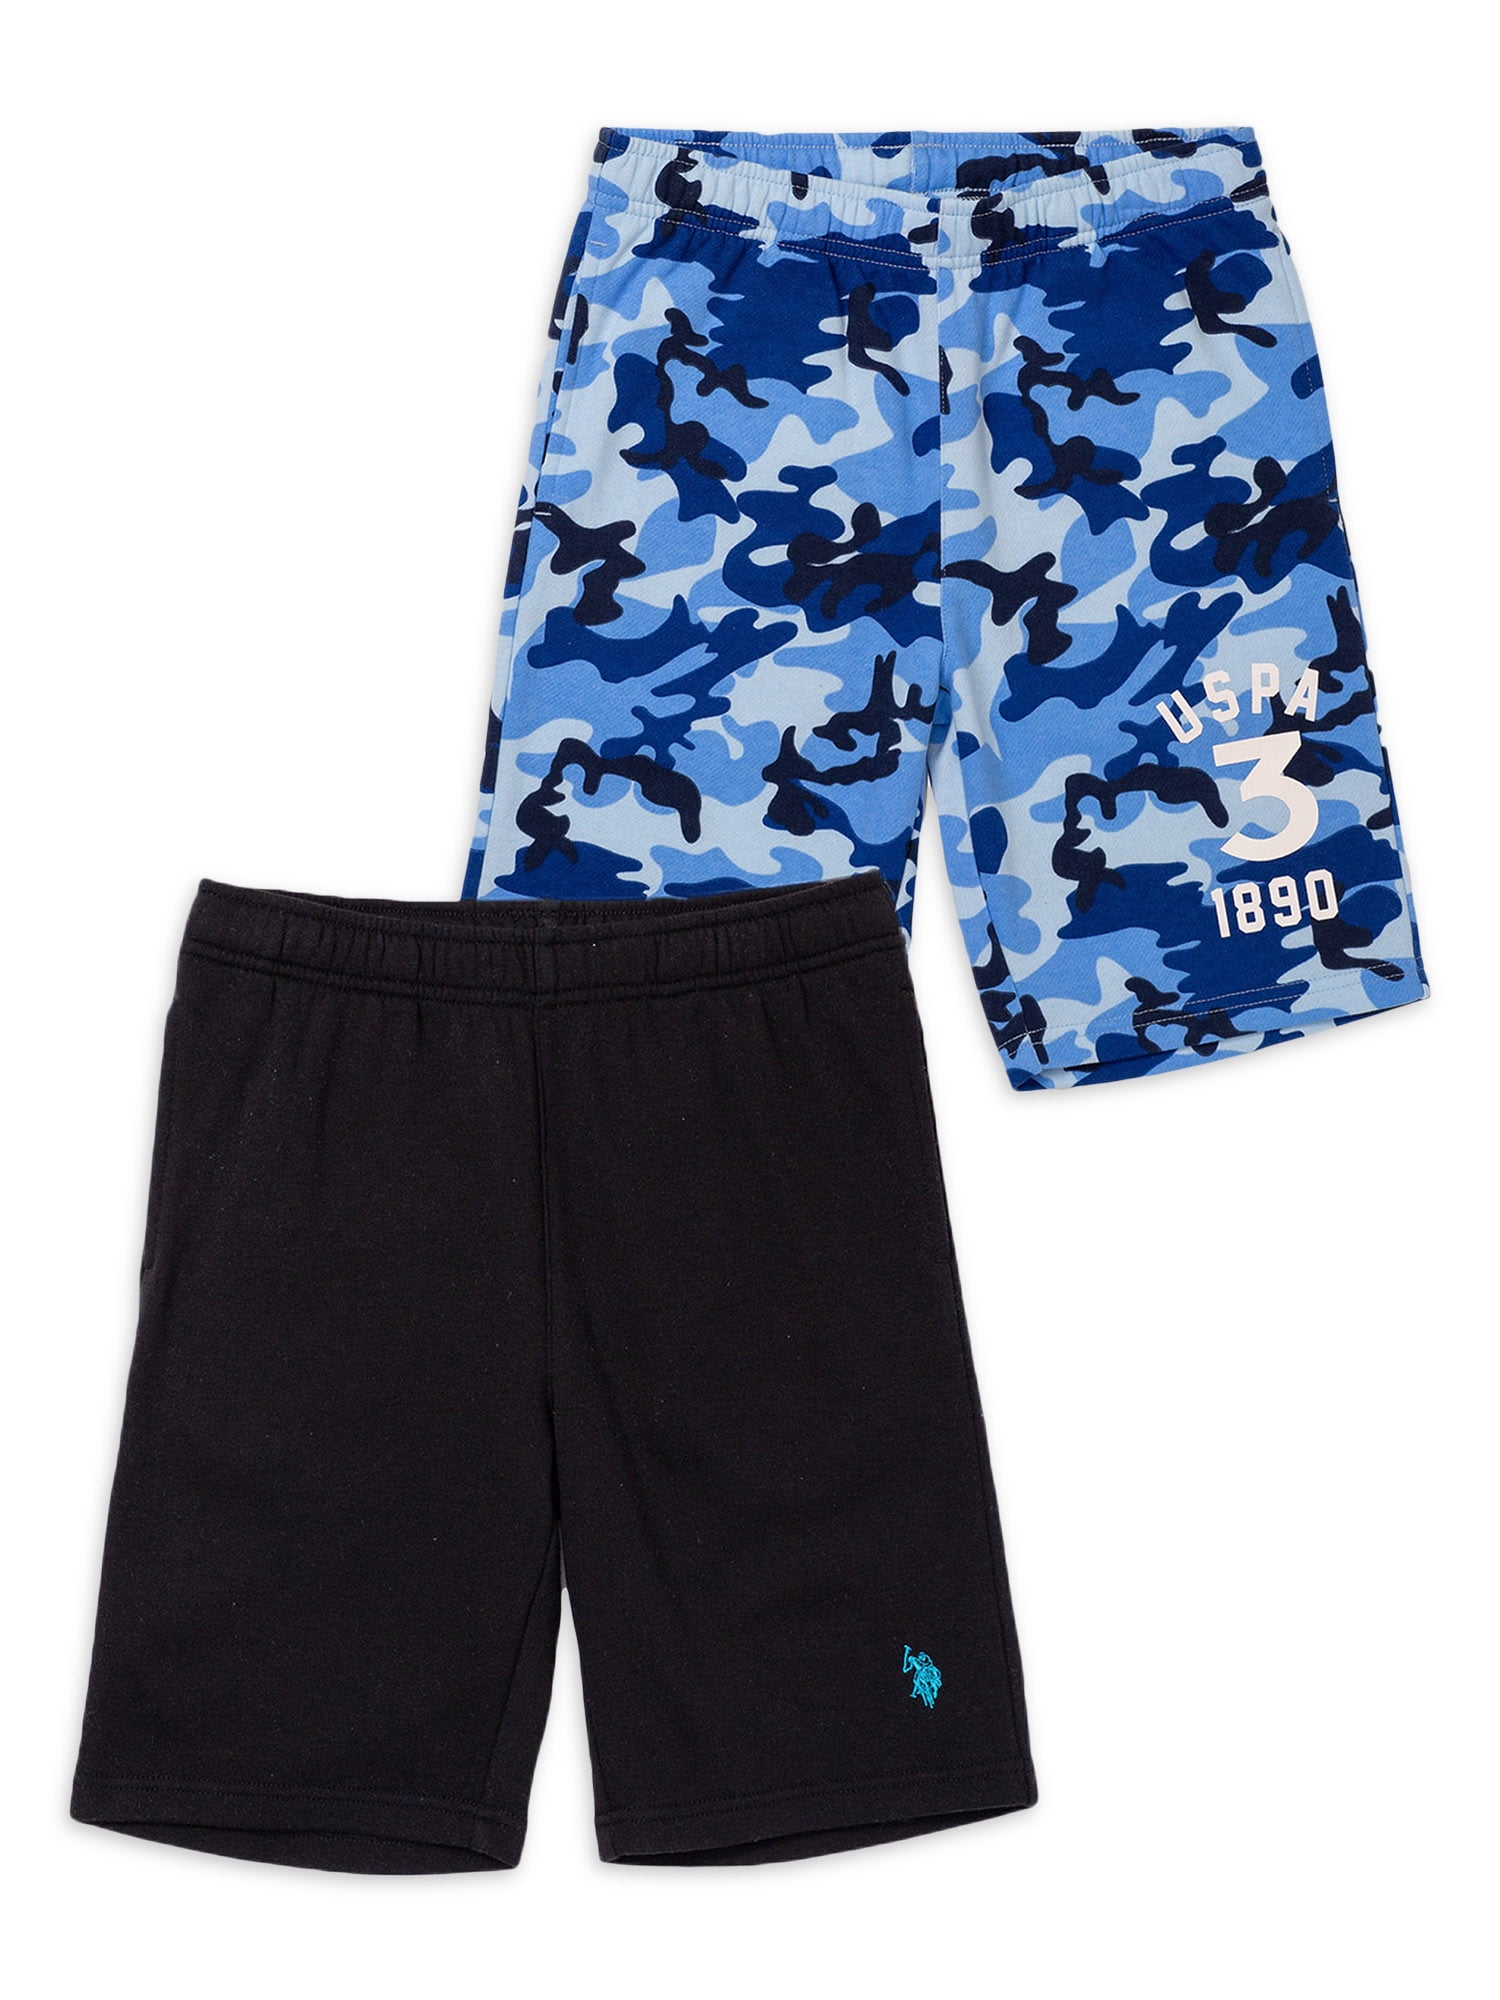 Navy Camo Rugby Shorts